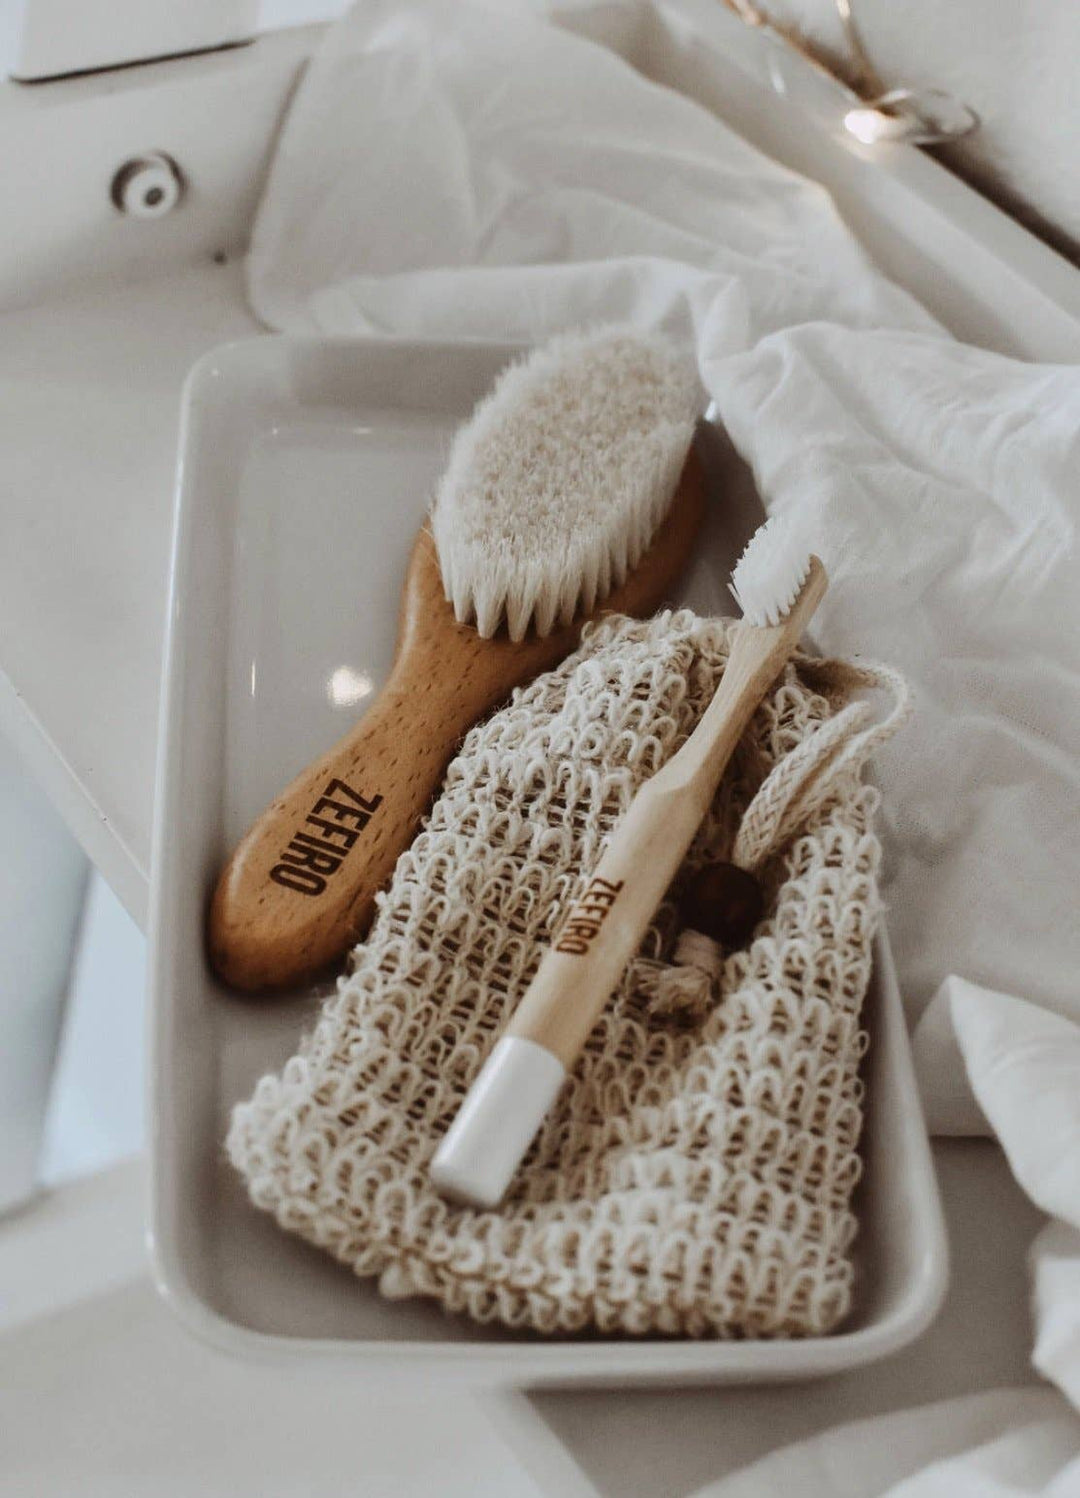 Bamboo Kid's Toothbrush - Free Living Co